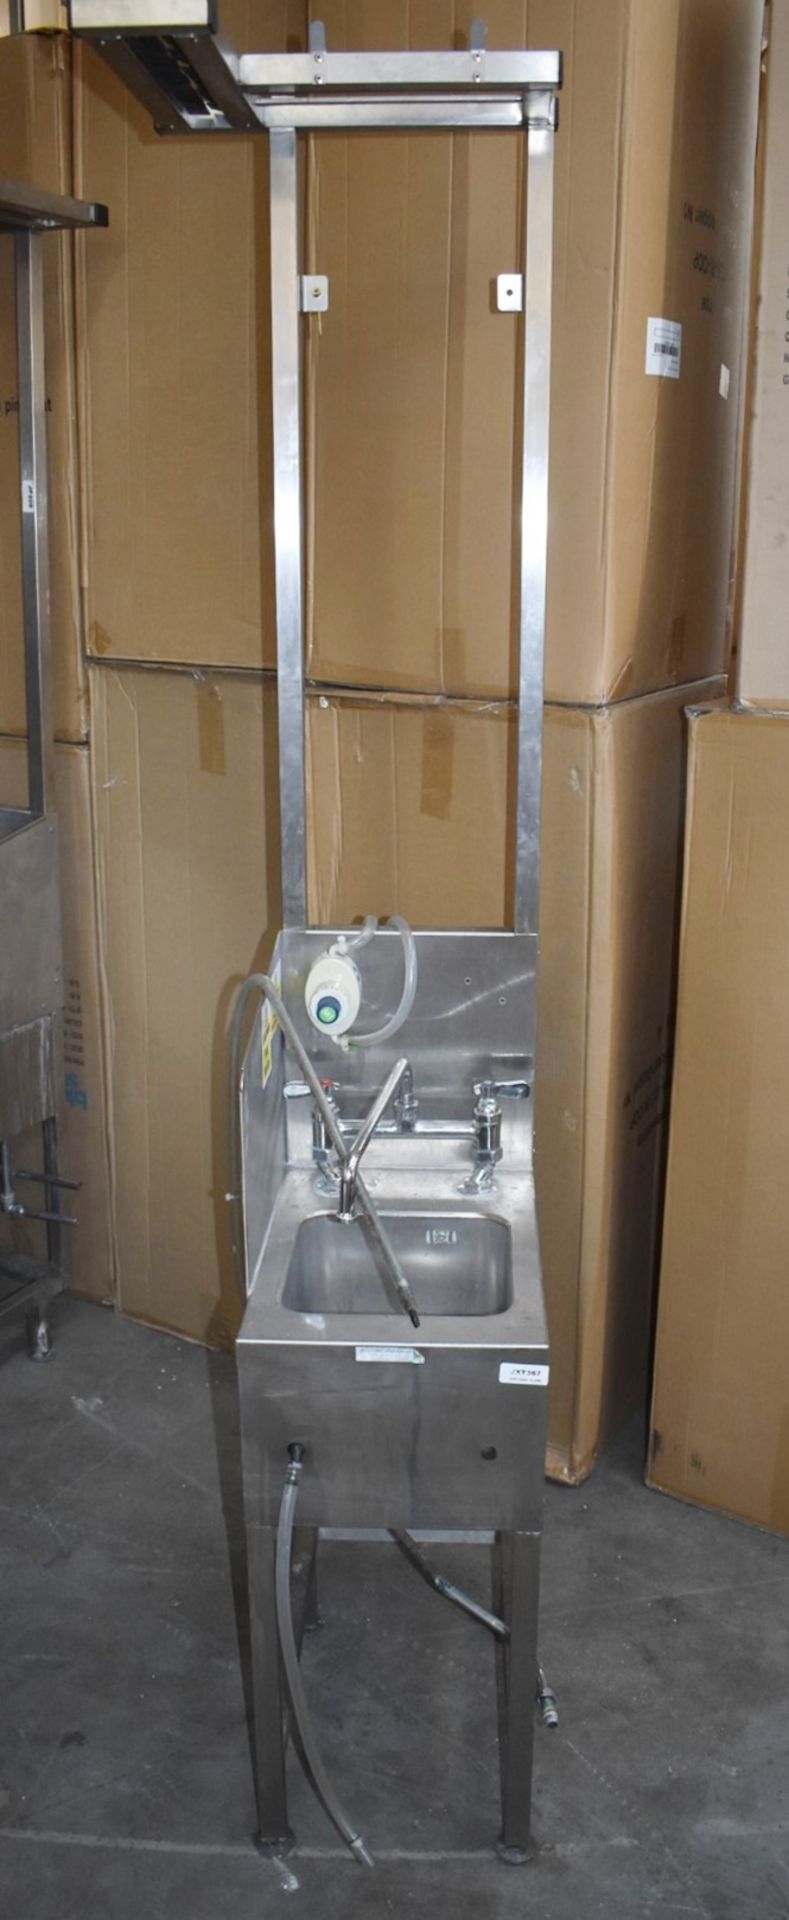 1 x Slim Janitorial Wash Station - Features Wash Bowl, Mop Hanger, Goggle Hook, Detergent Pump & Tap - Image 2 of 5